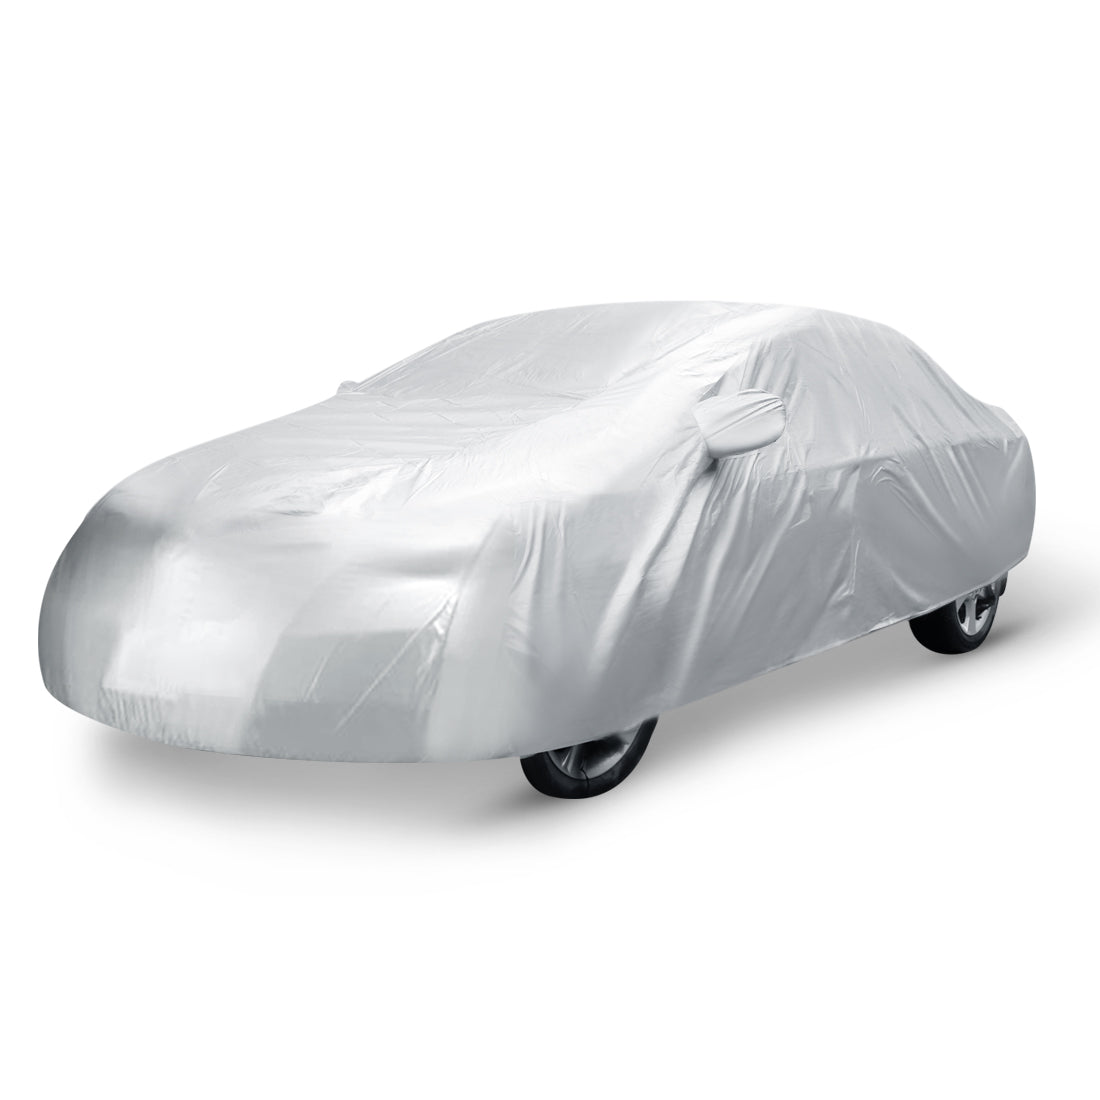 uxcell Uxcell XXL Car Cover Waterproof Sun Snow Dust Rain Resistant Protection 5.35M x 2M x 1.6M